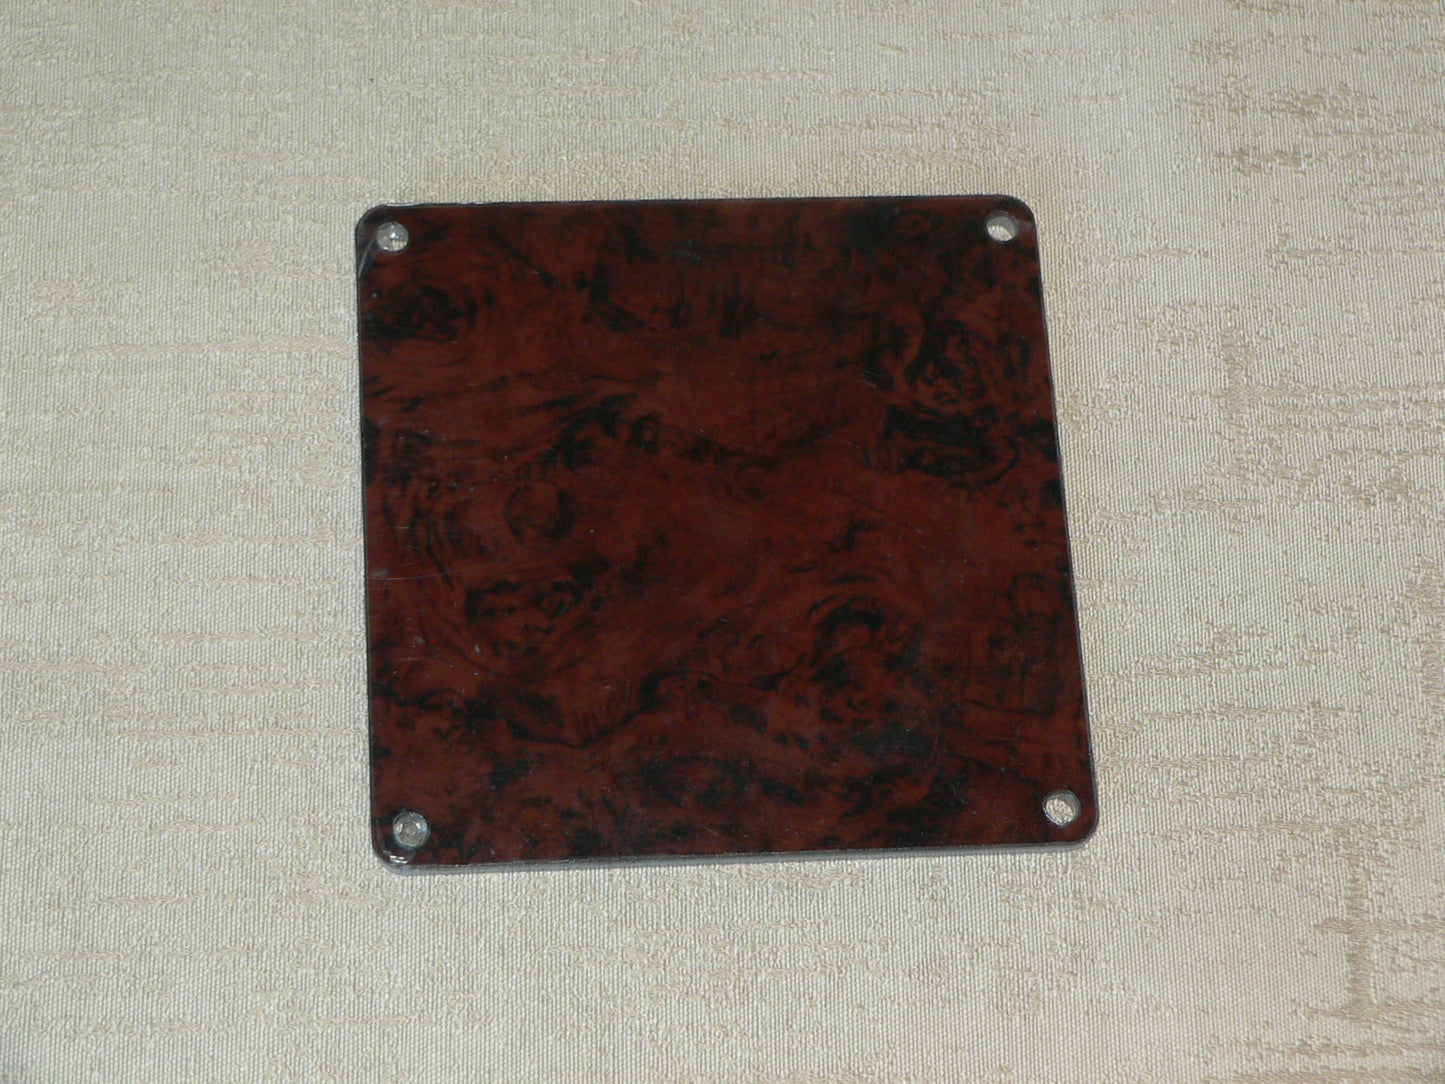 4" x 4" cover plate